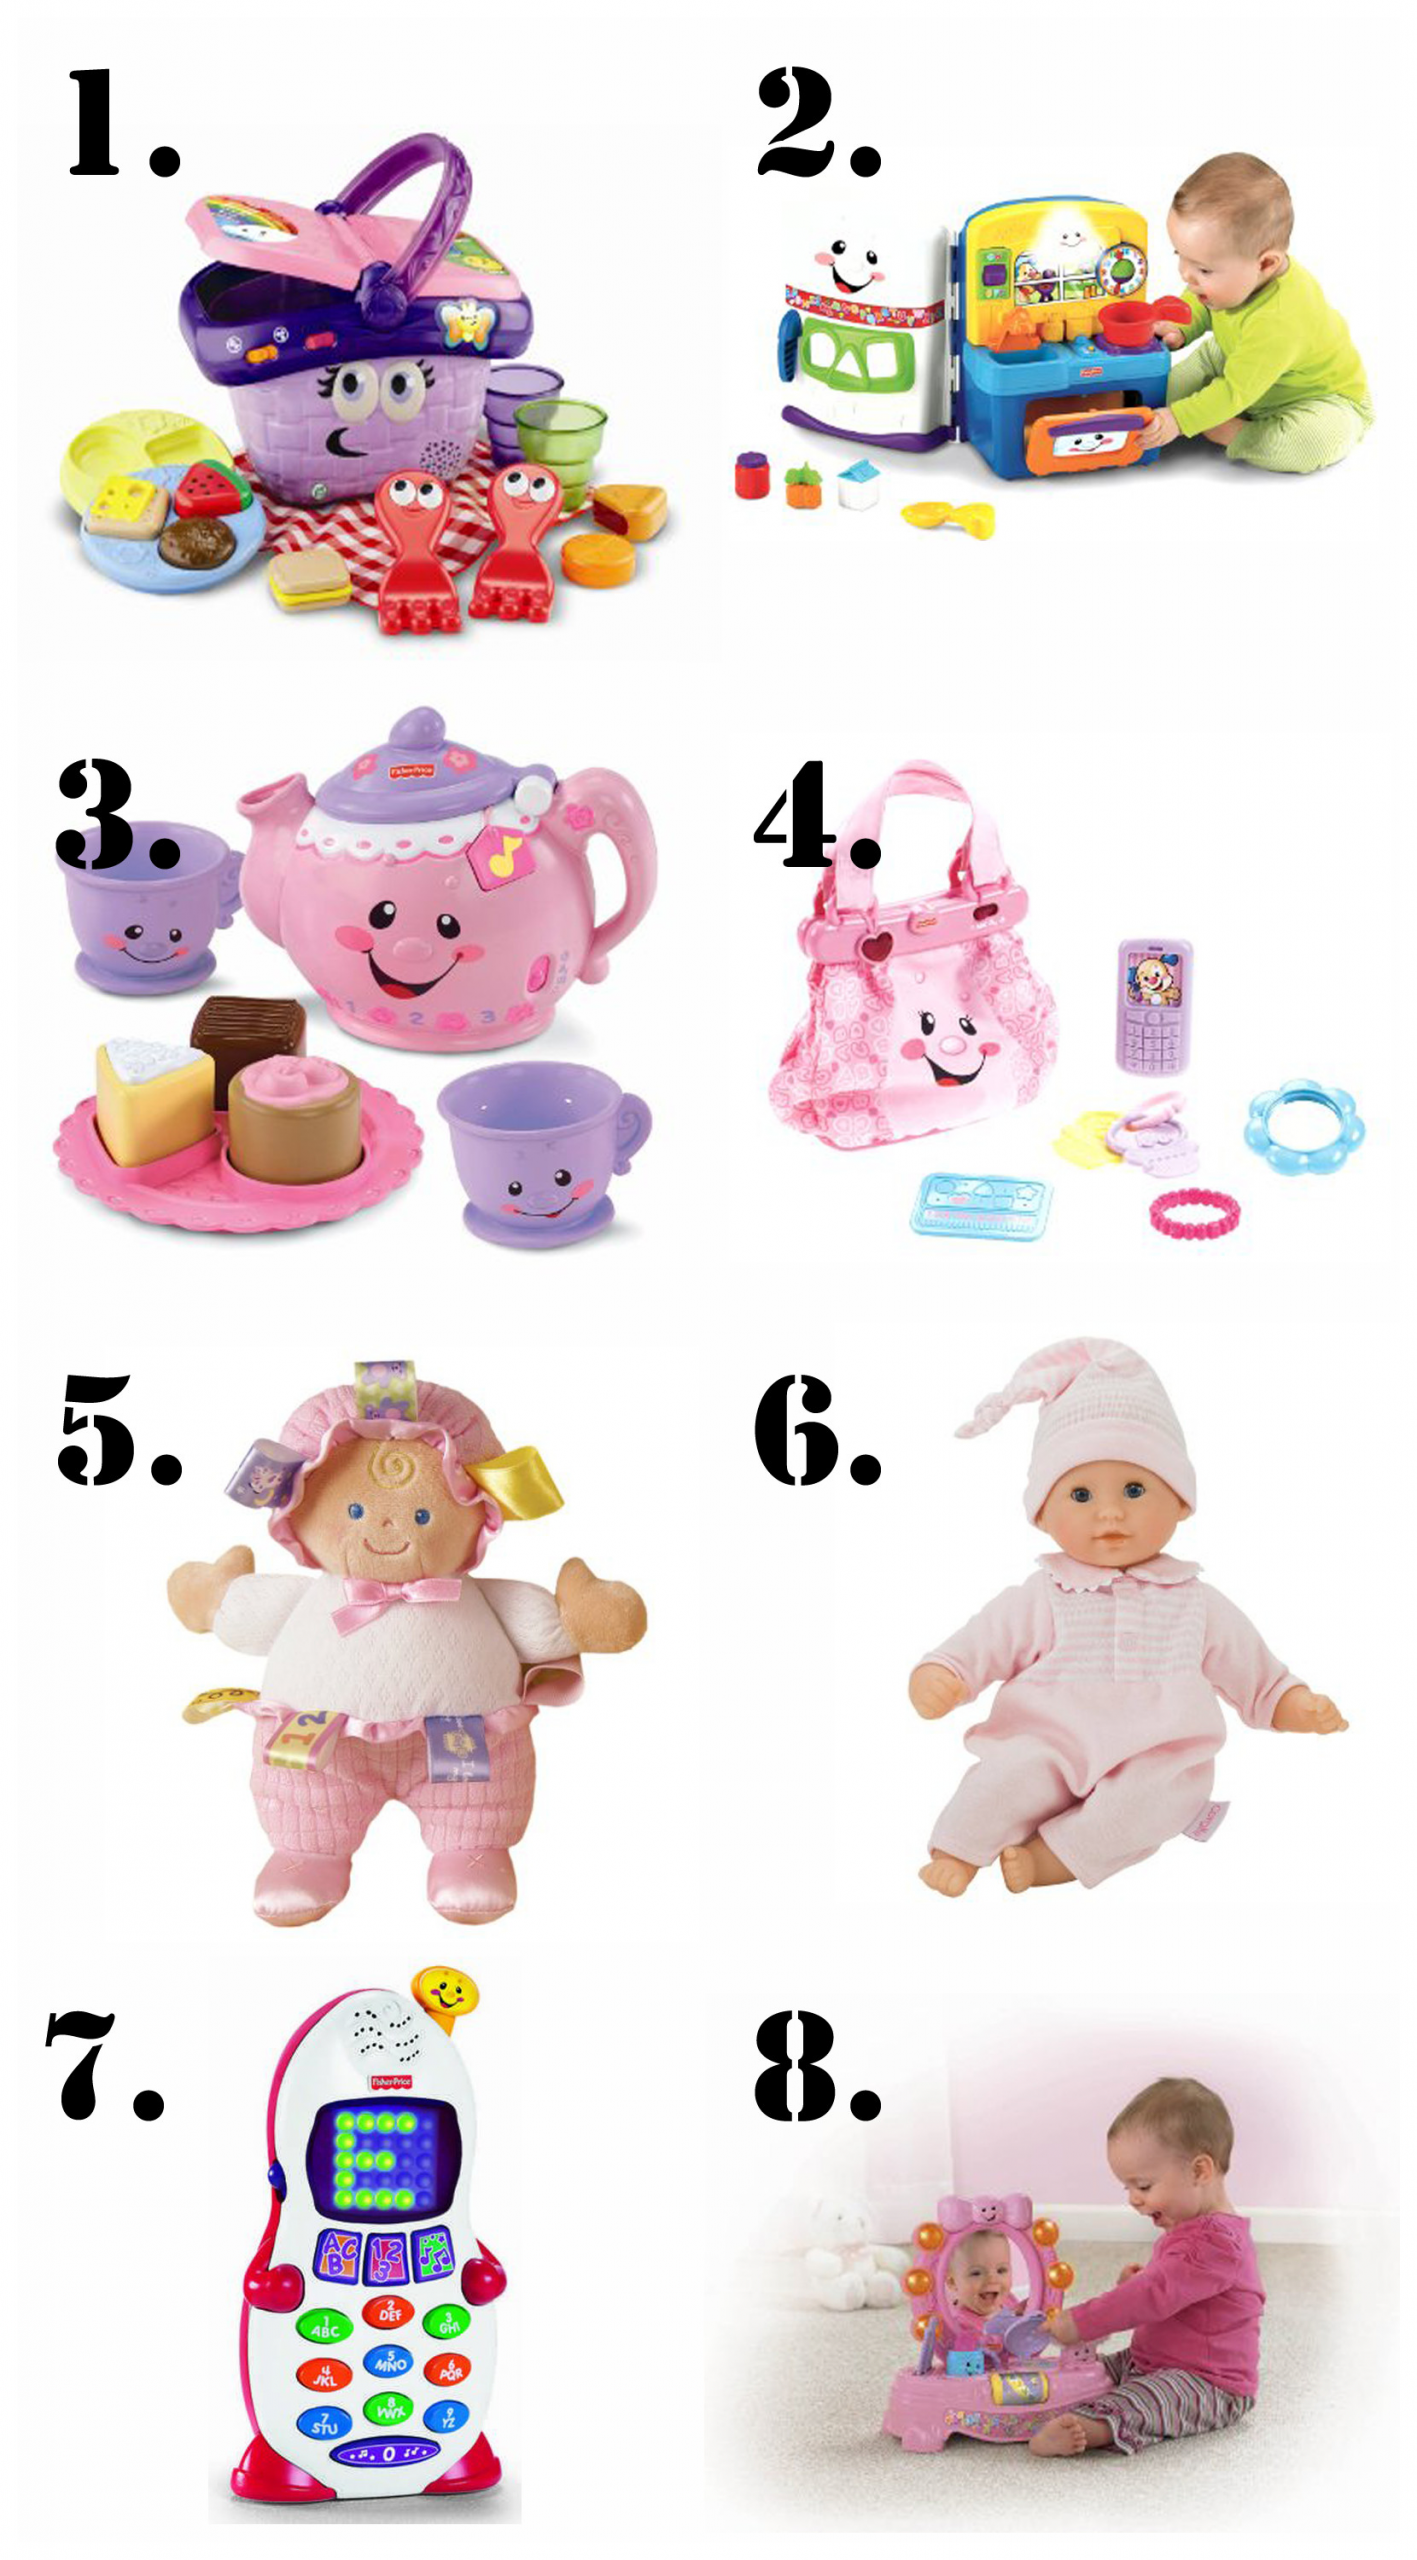 Christmas Gift Ideas For 1 Year Old Baby Girl
 best birthday presents for a 1 year old